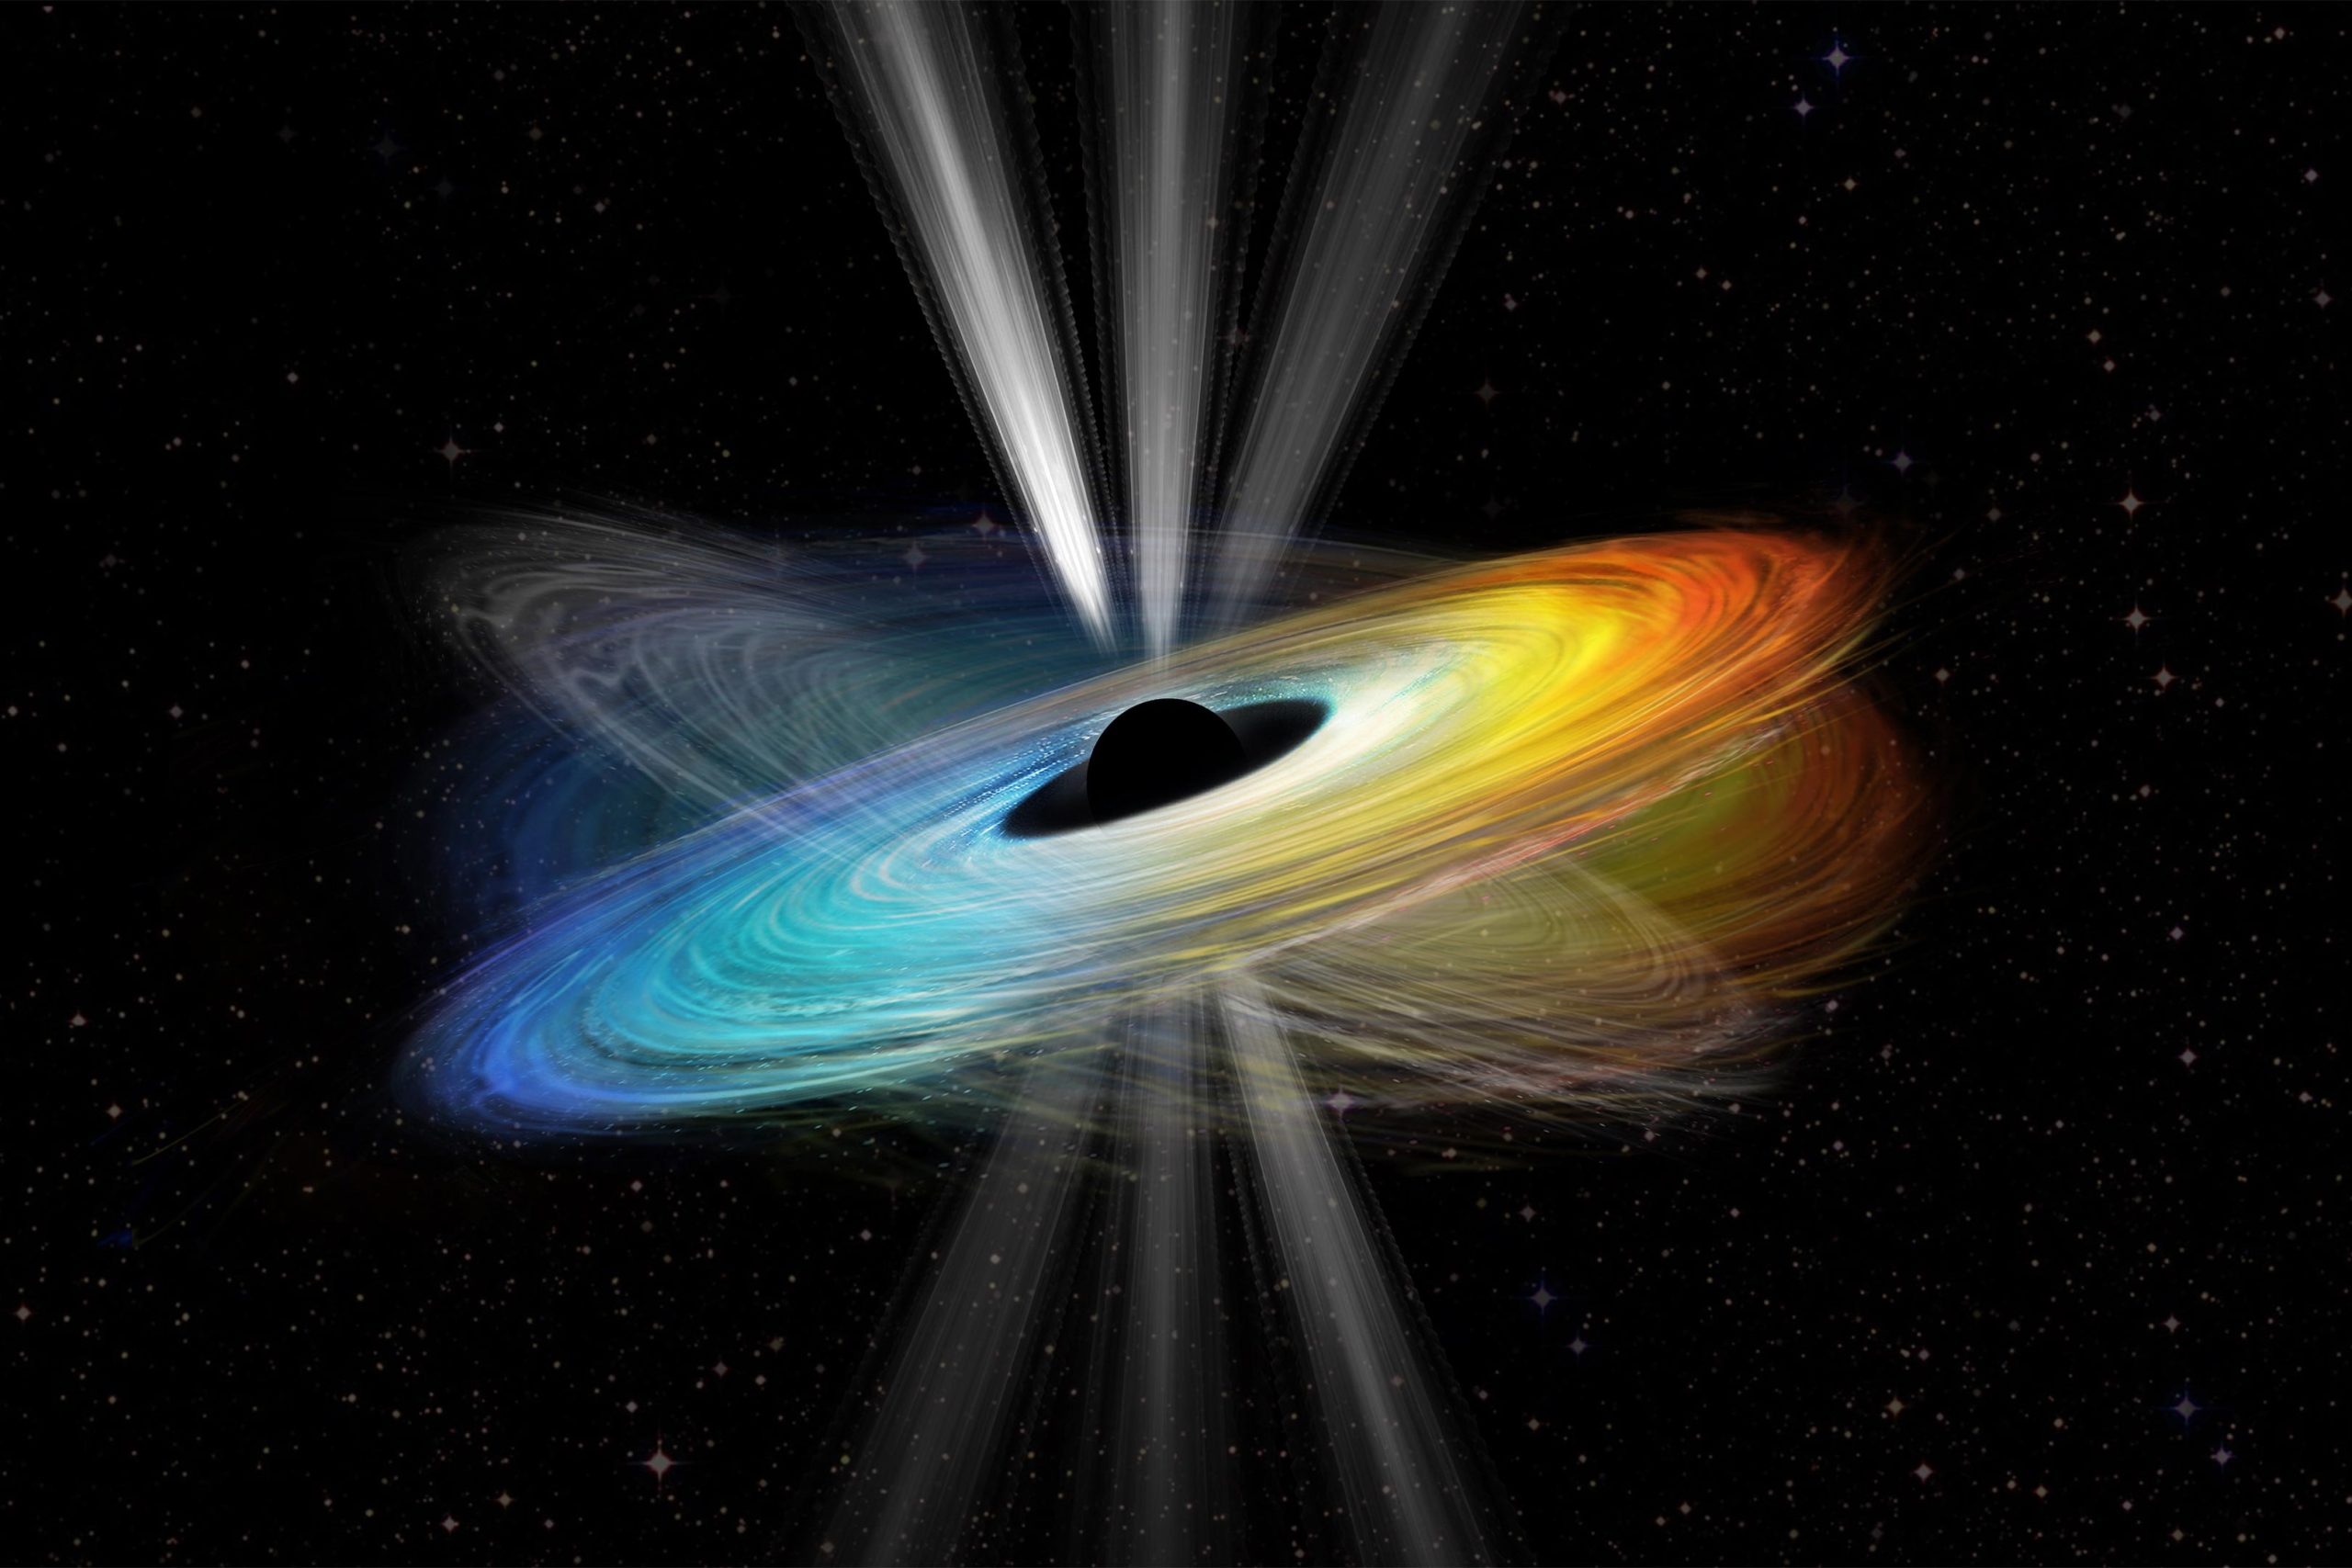 Verifying the rotation of a supermassive black hole – Einstein’s theory of general relativity shines